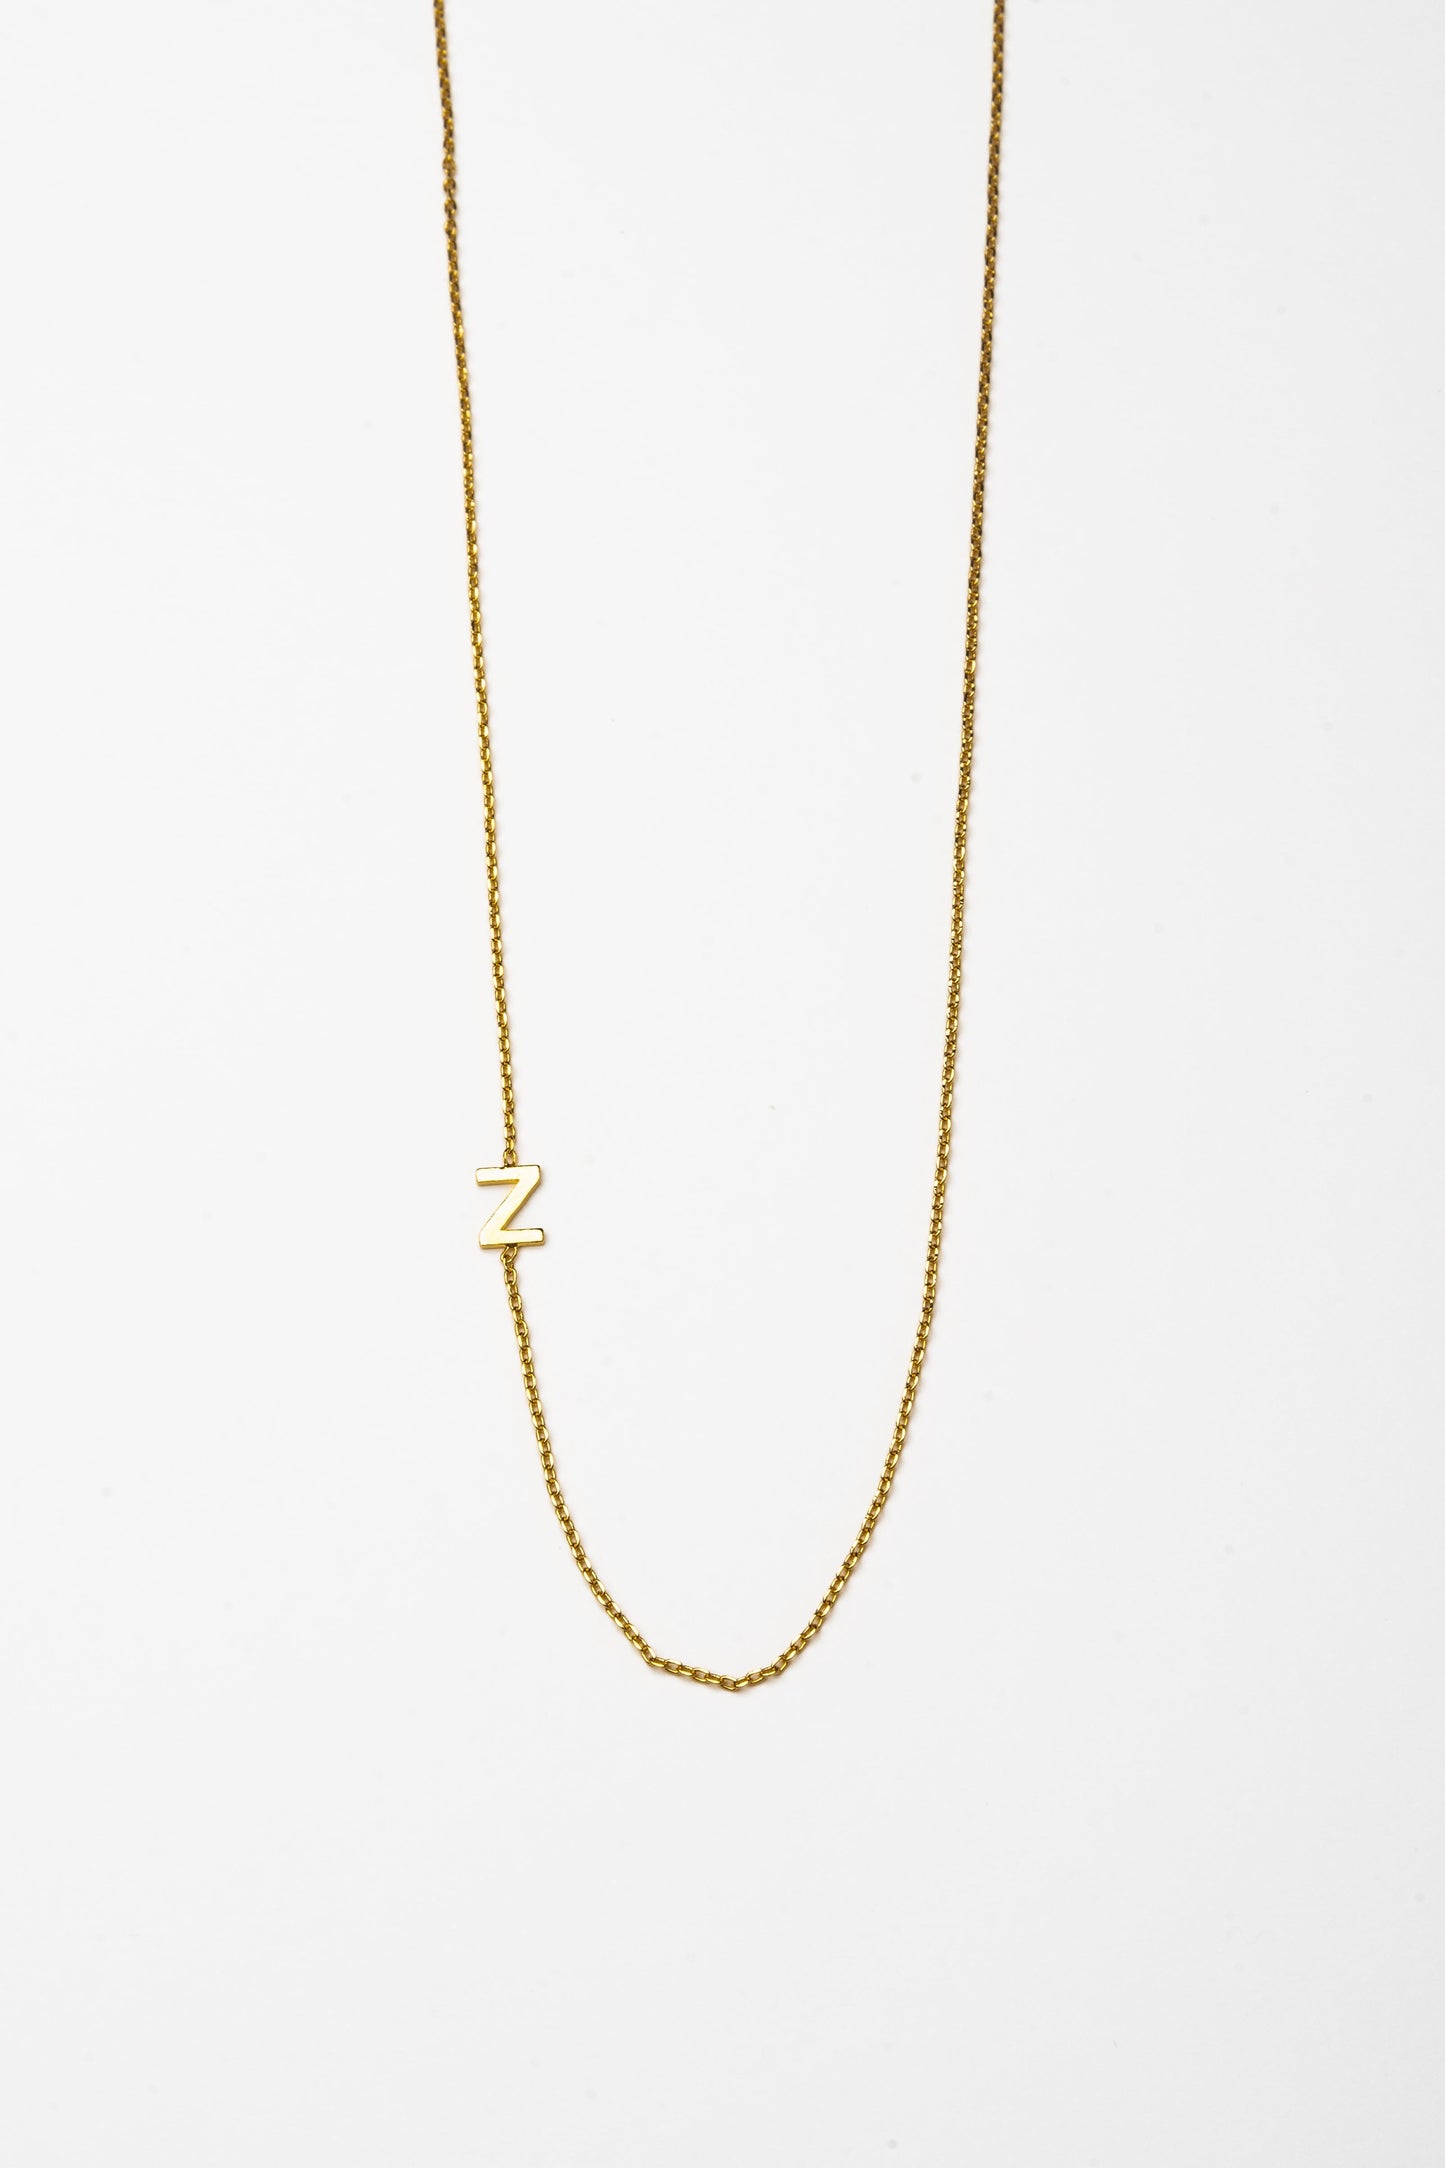 Cove Initial Necklace WOMEN'S NECKLACE Cove Accessories 18k Gold Plated 16" + 2" extender Z